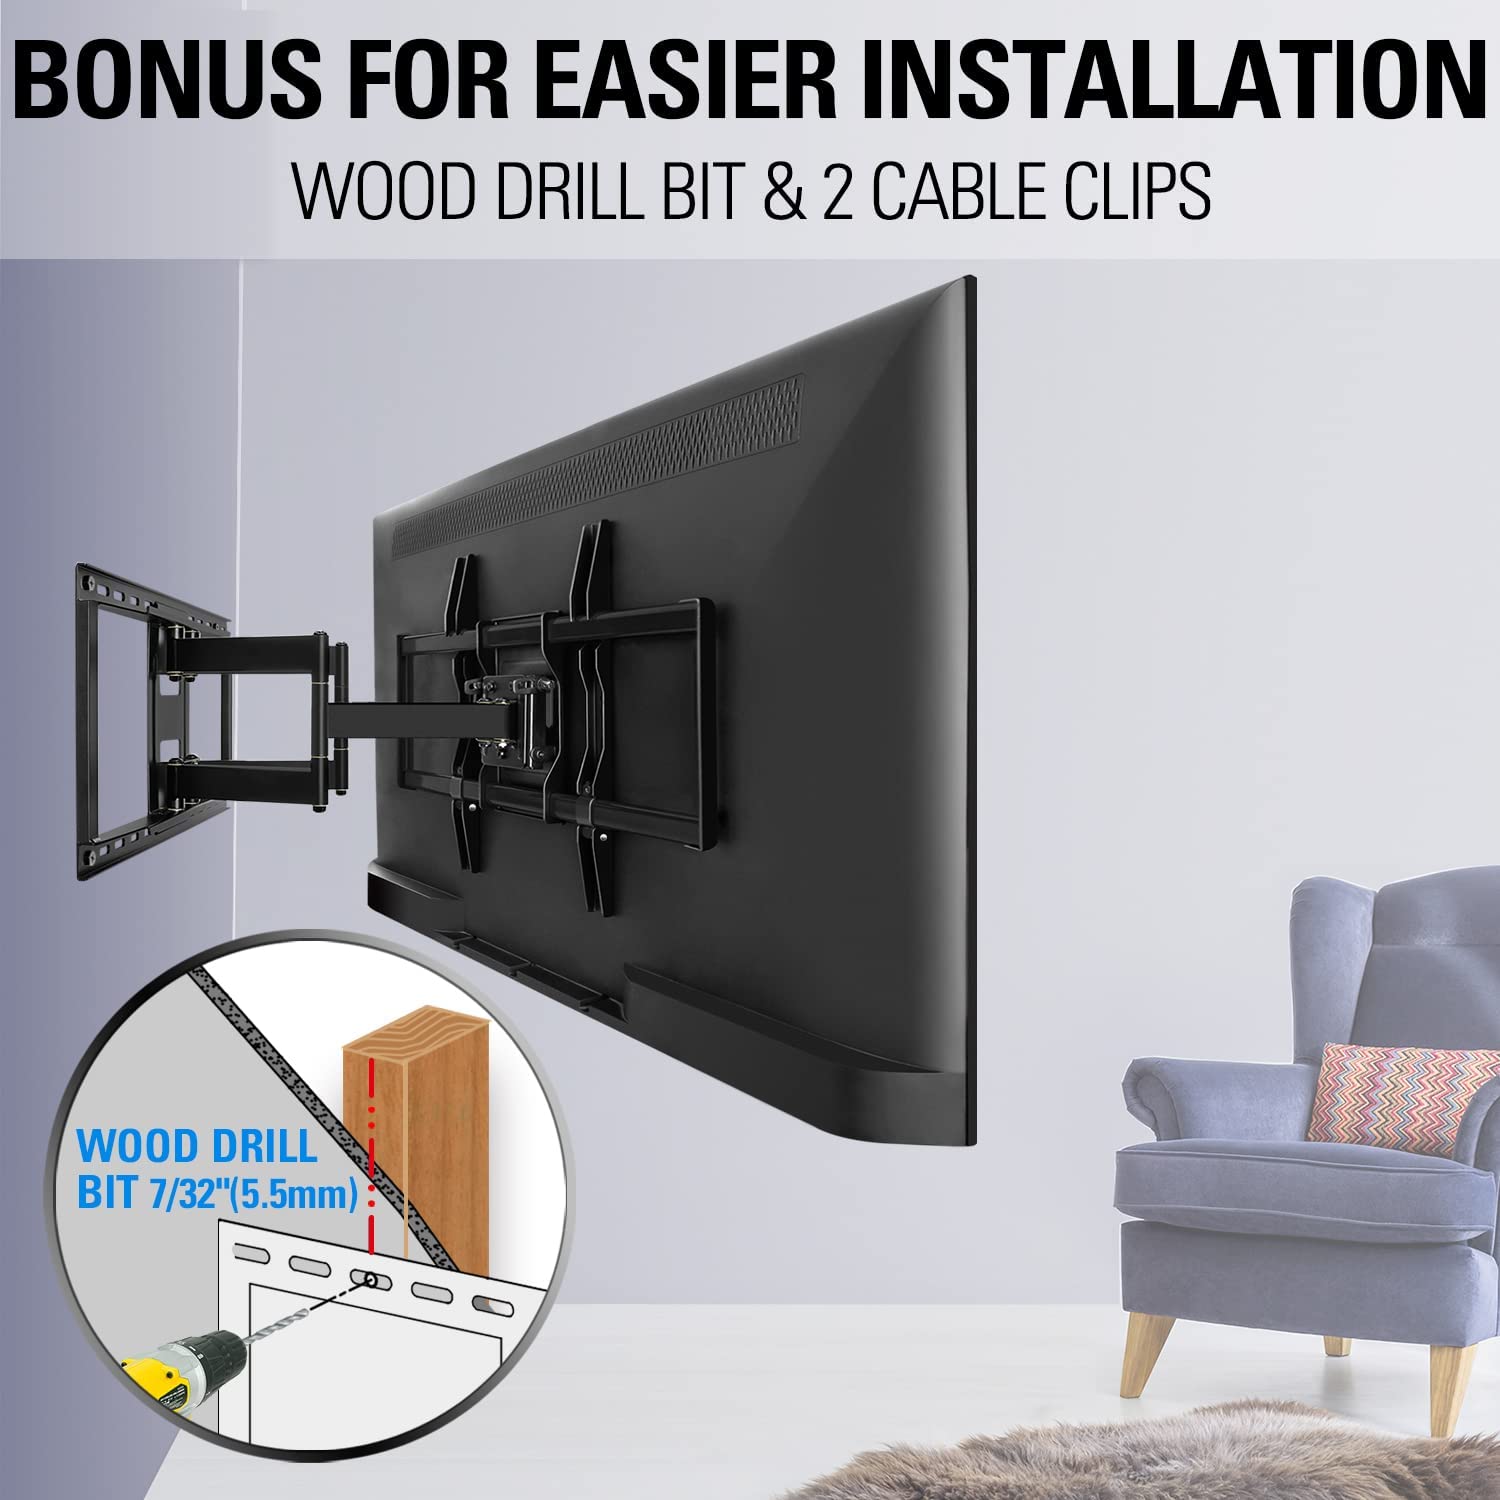 TV wall mount with wood drill bit for easier installation